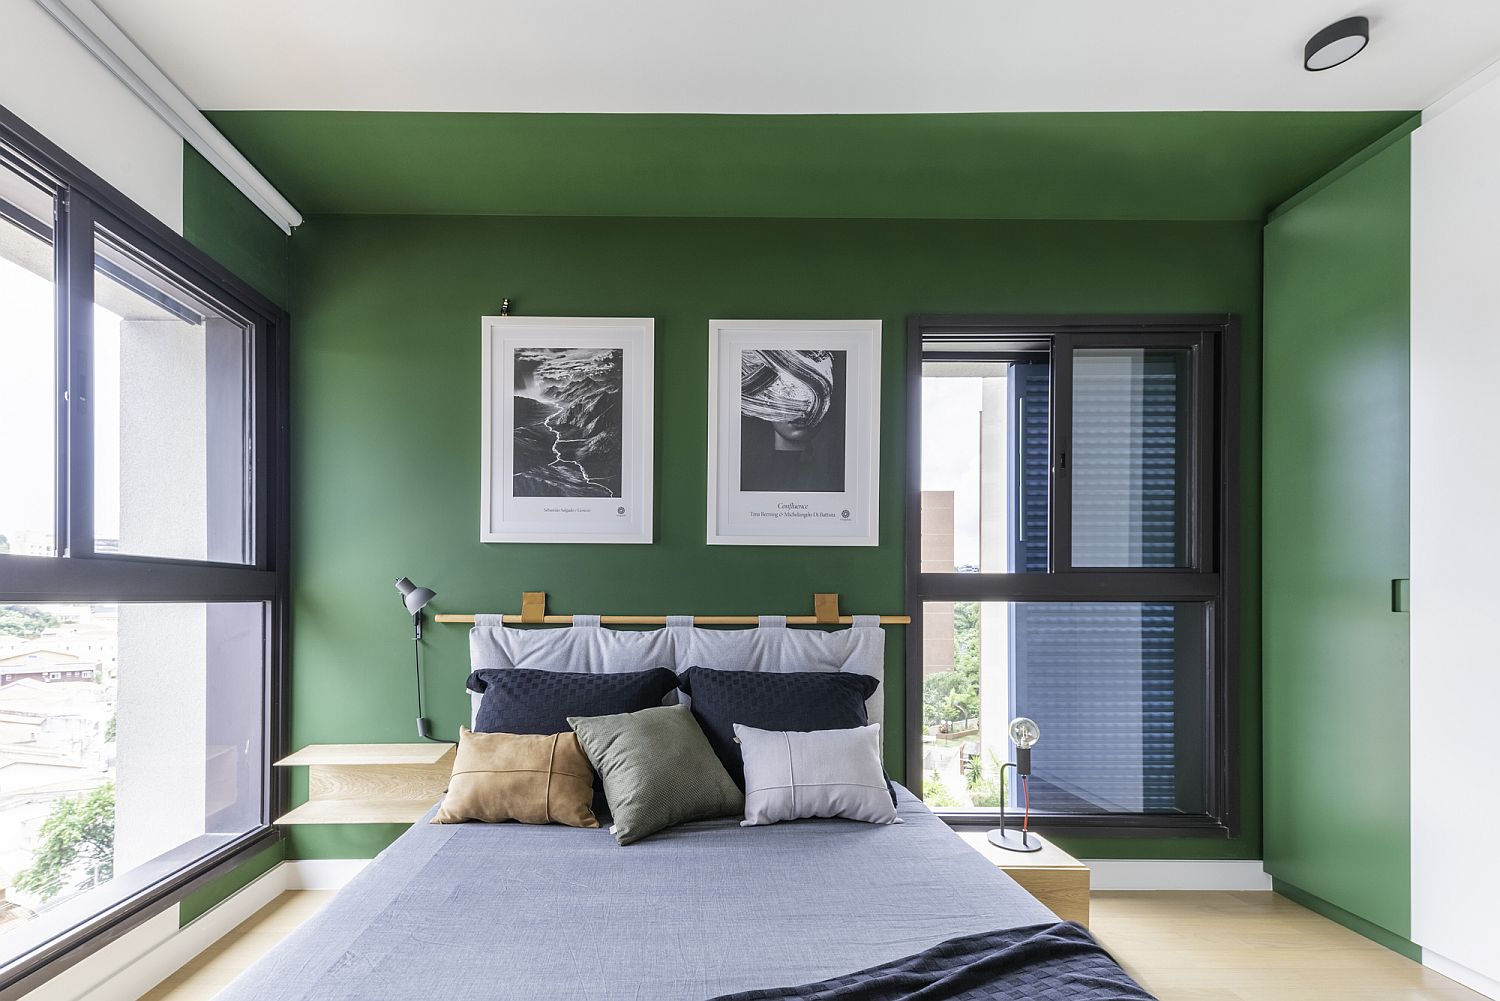 Exquisite modern bedroom with green accent wall and comfy decor